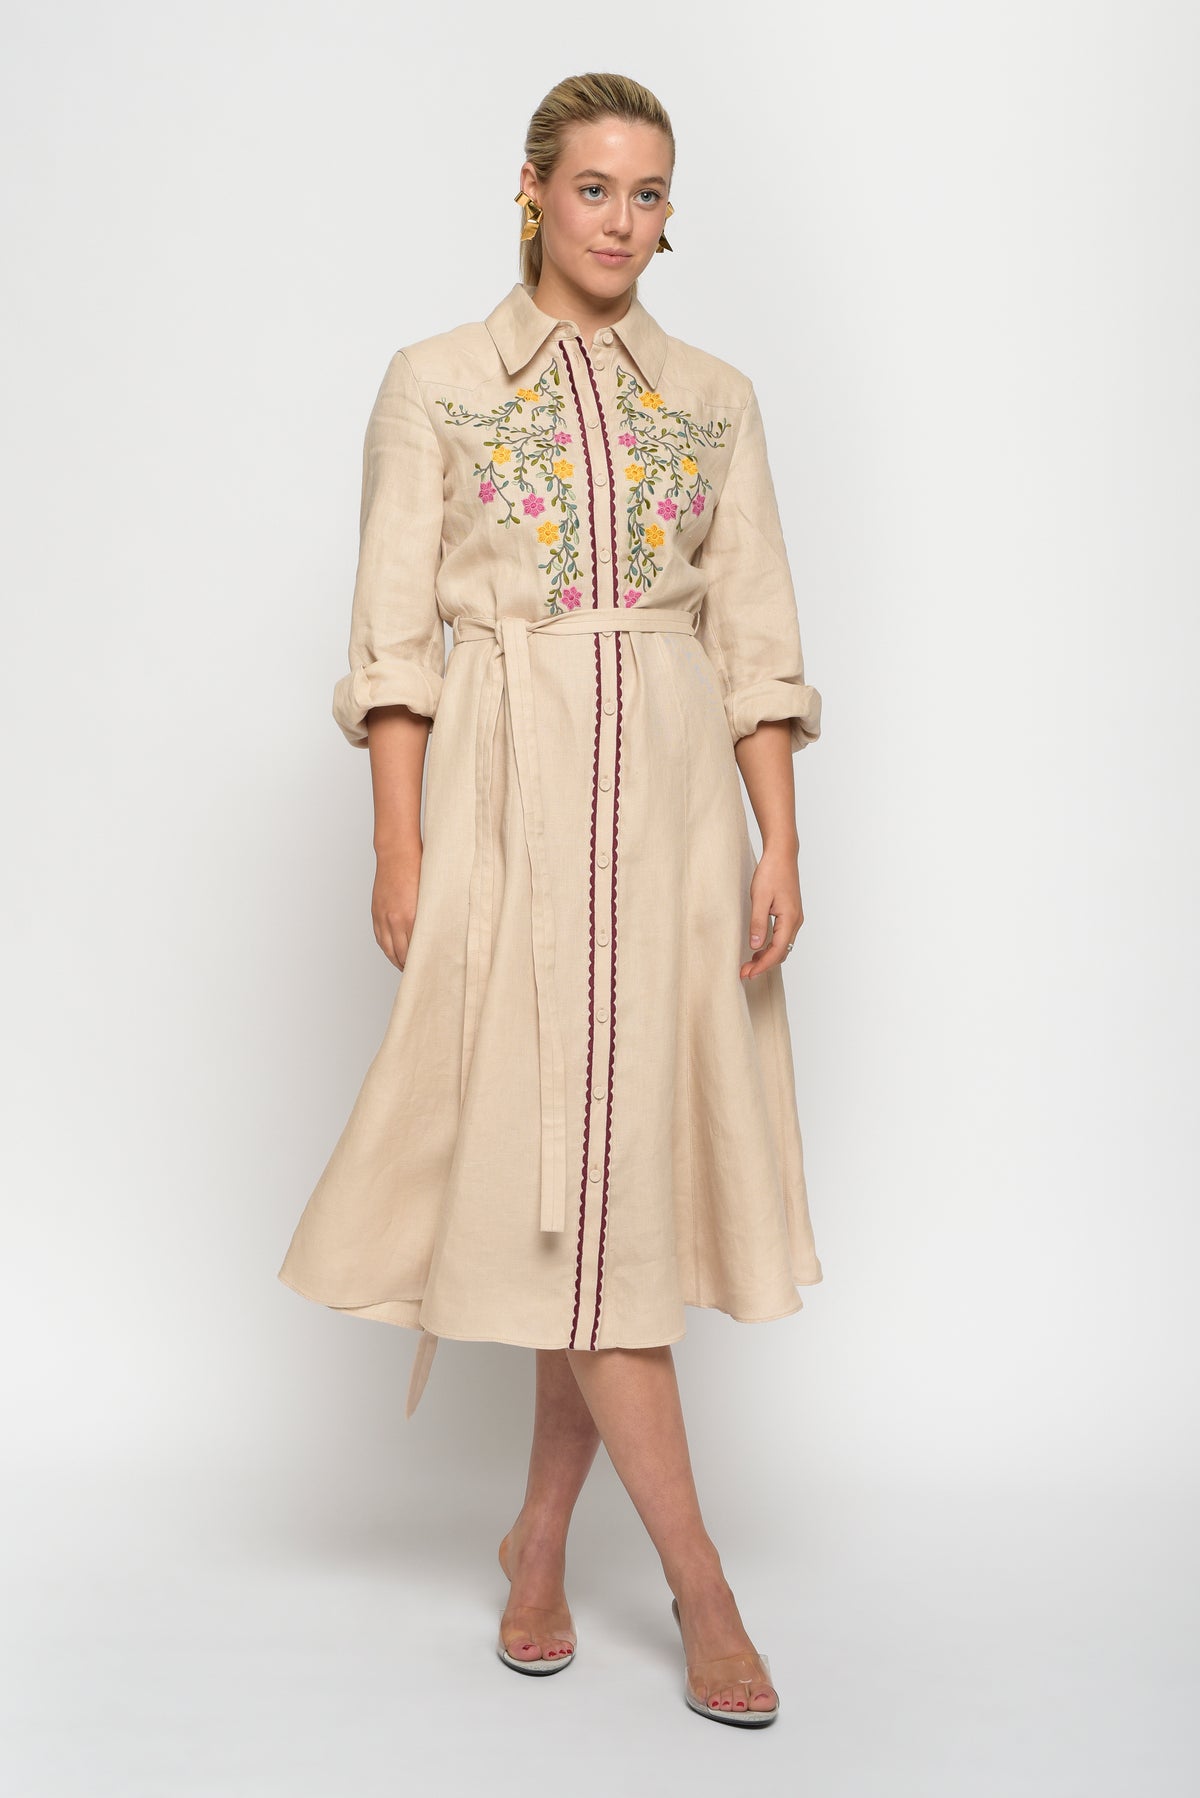 Chloé Dress With Floral Embroidery